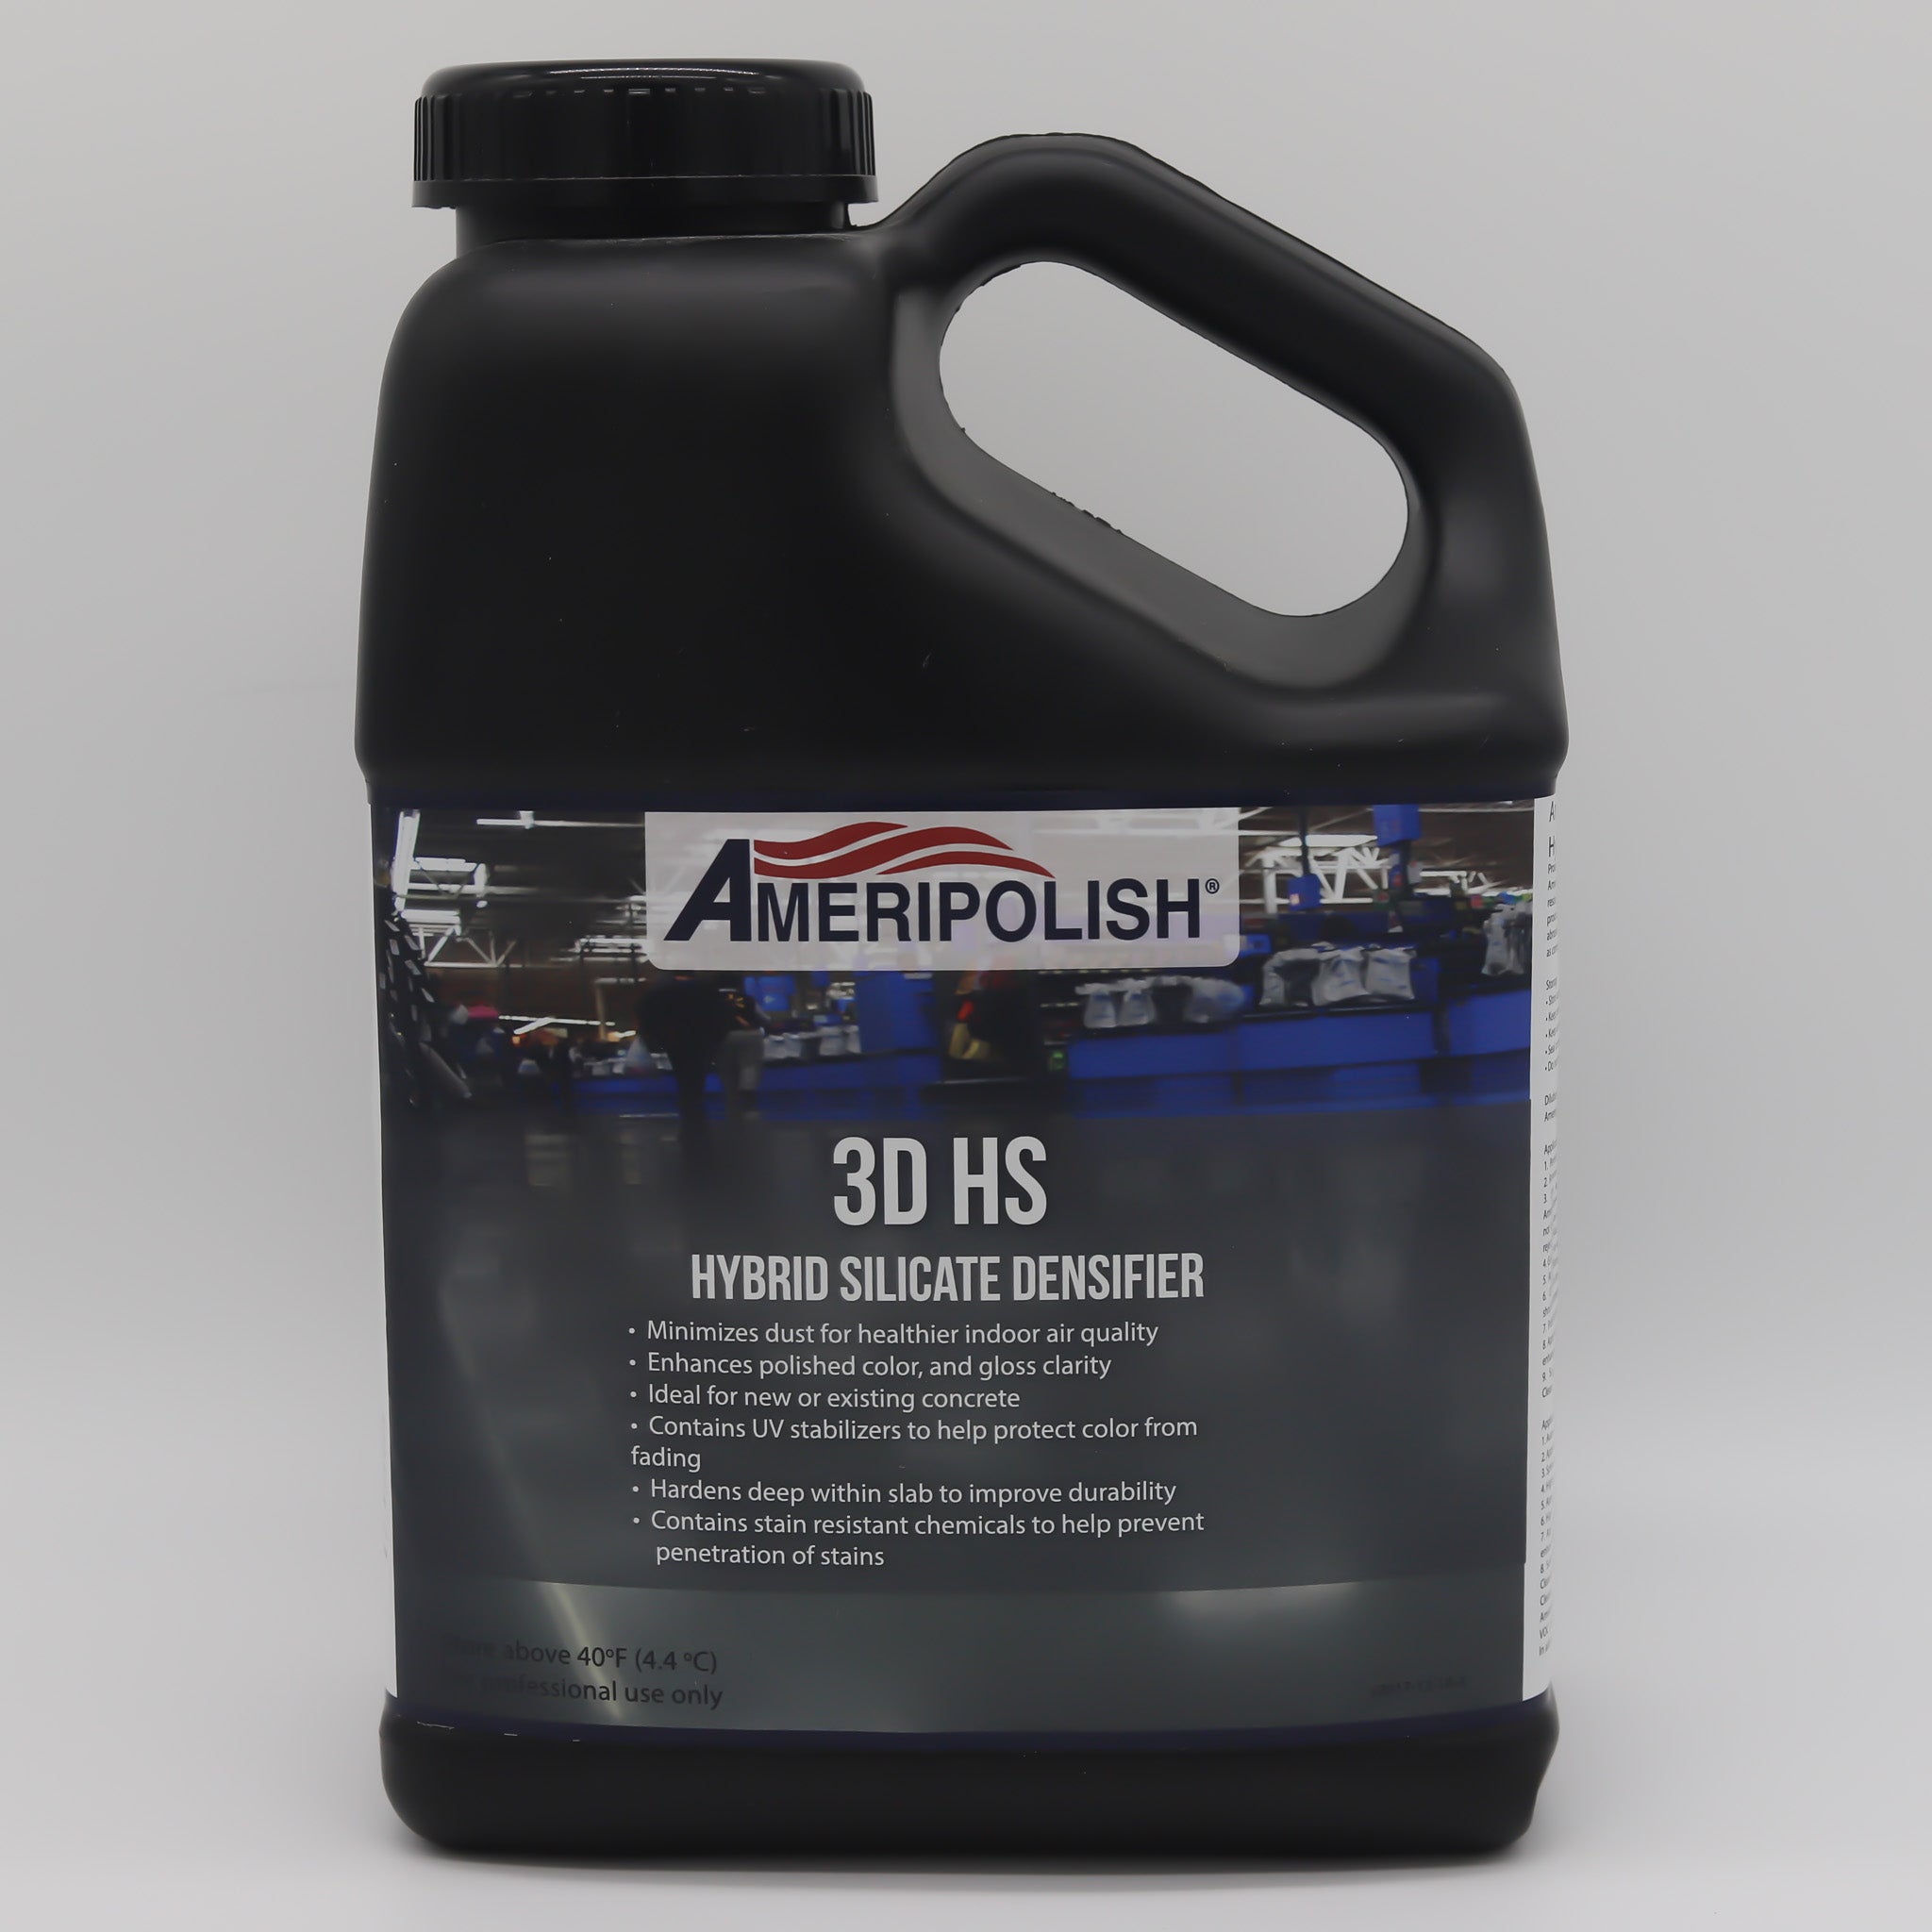 Ameripolish 3D HS - Hybrid Silicate Densifier - Freight Only